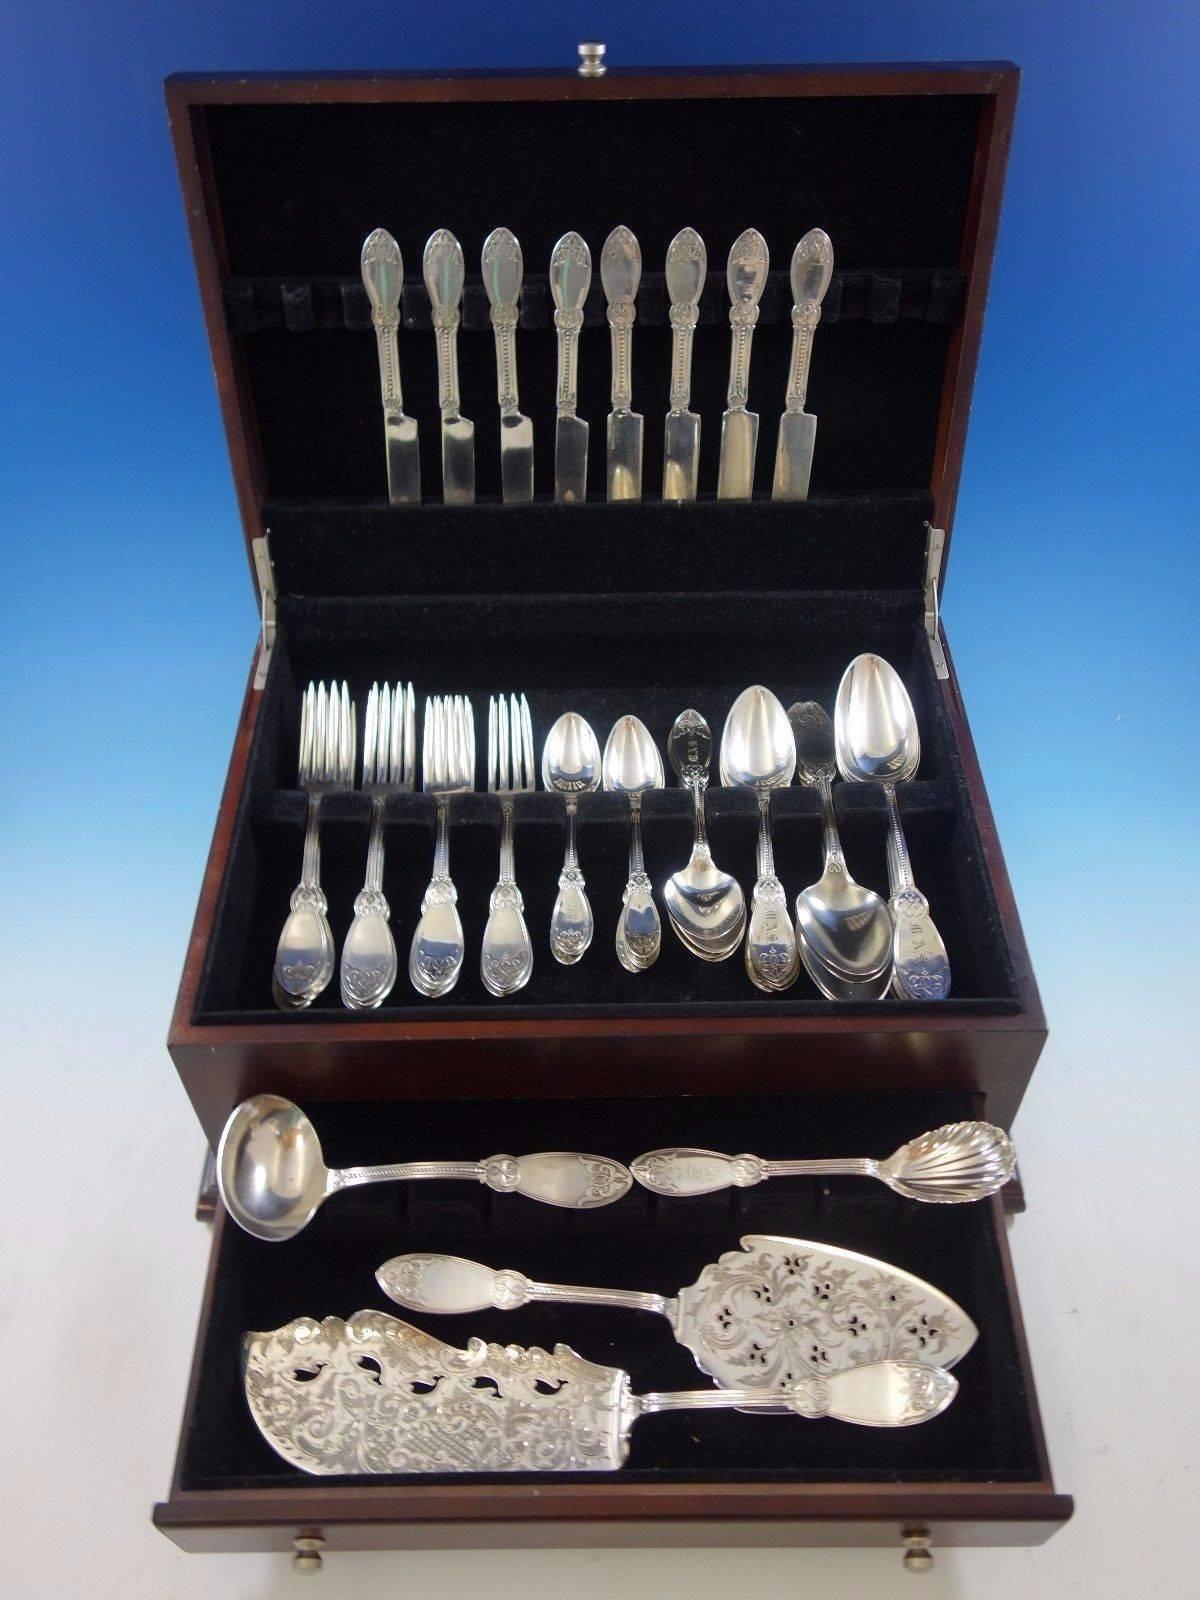 Oriental by John Polhamus / Shiebler sterling silver flatware set, 52 pieces. This set includes: 

Eight knives, flat handle, 7 7/8